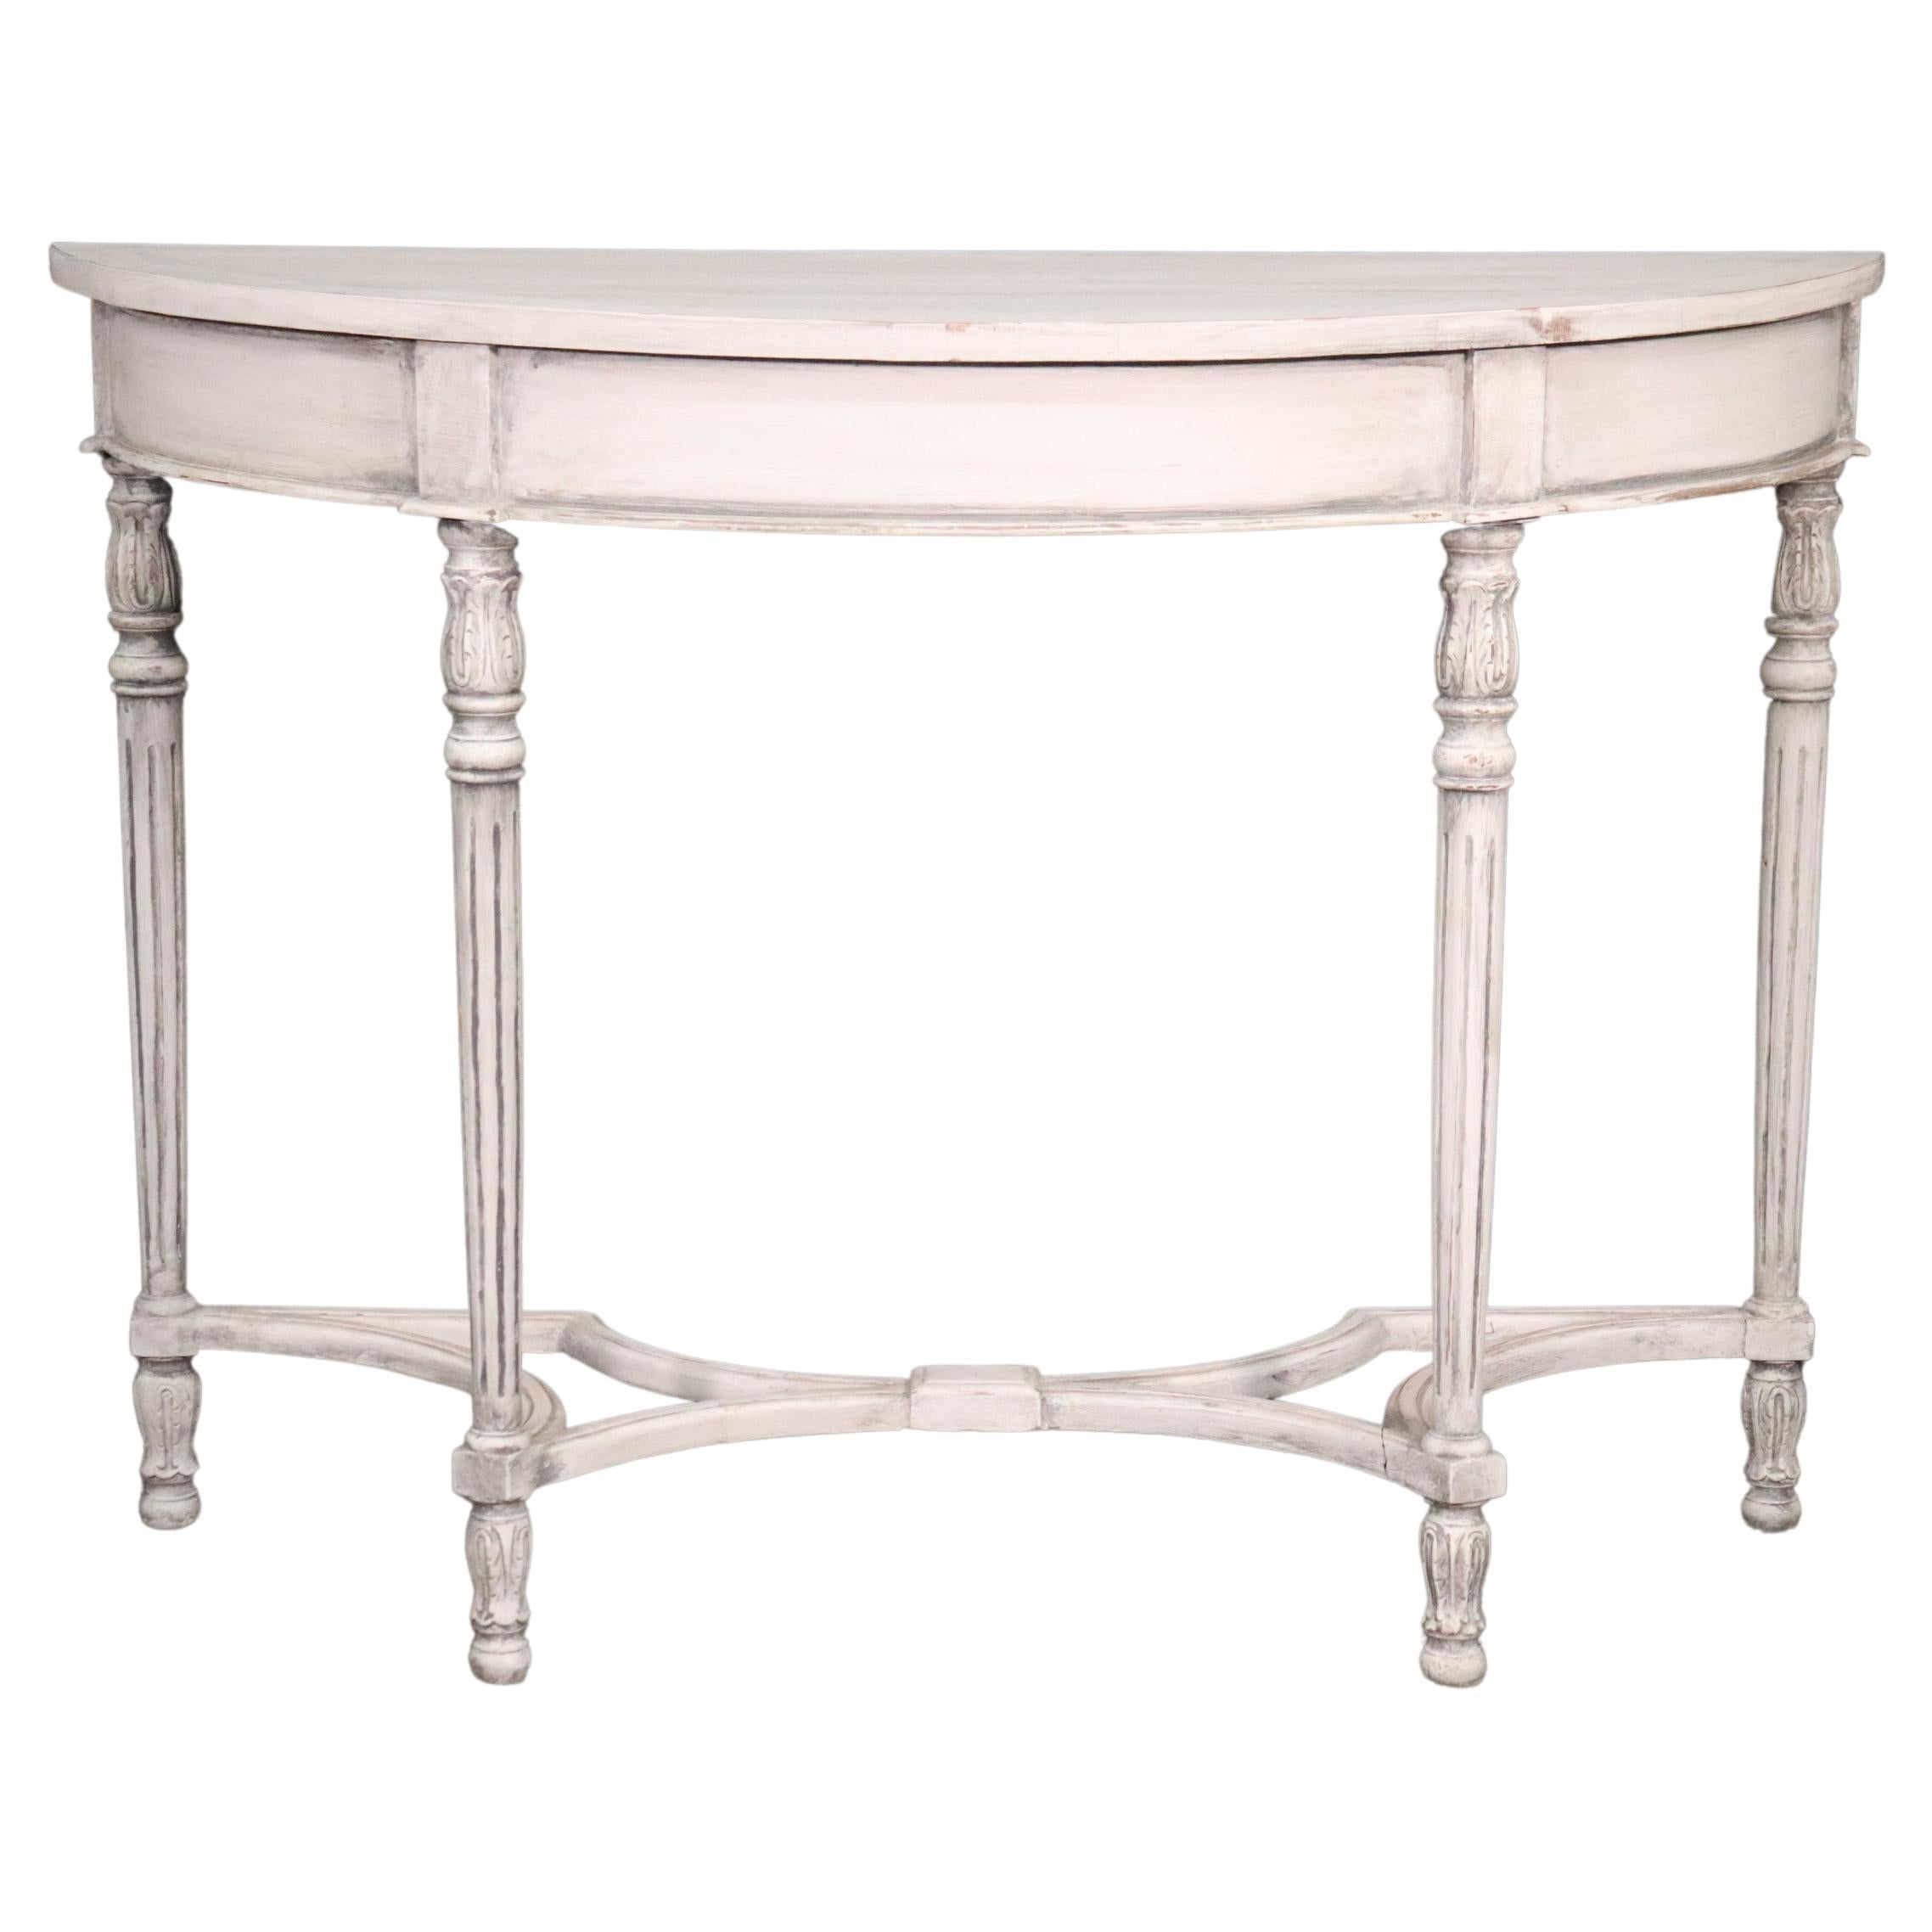 Chic Antique White Painted Demilune French Louis XVI Console Table For Sale